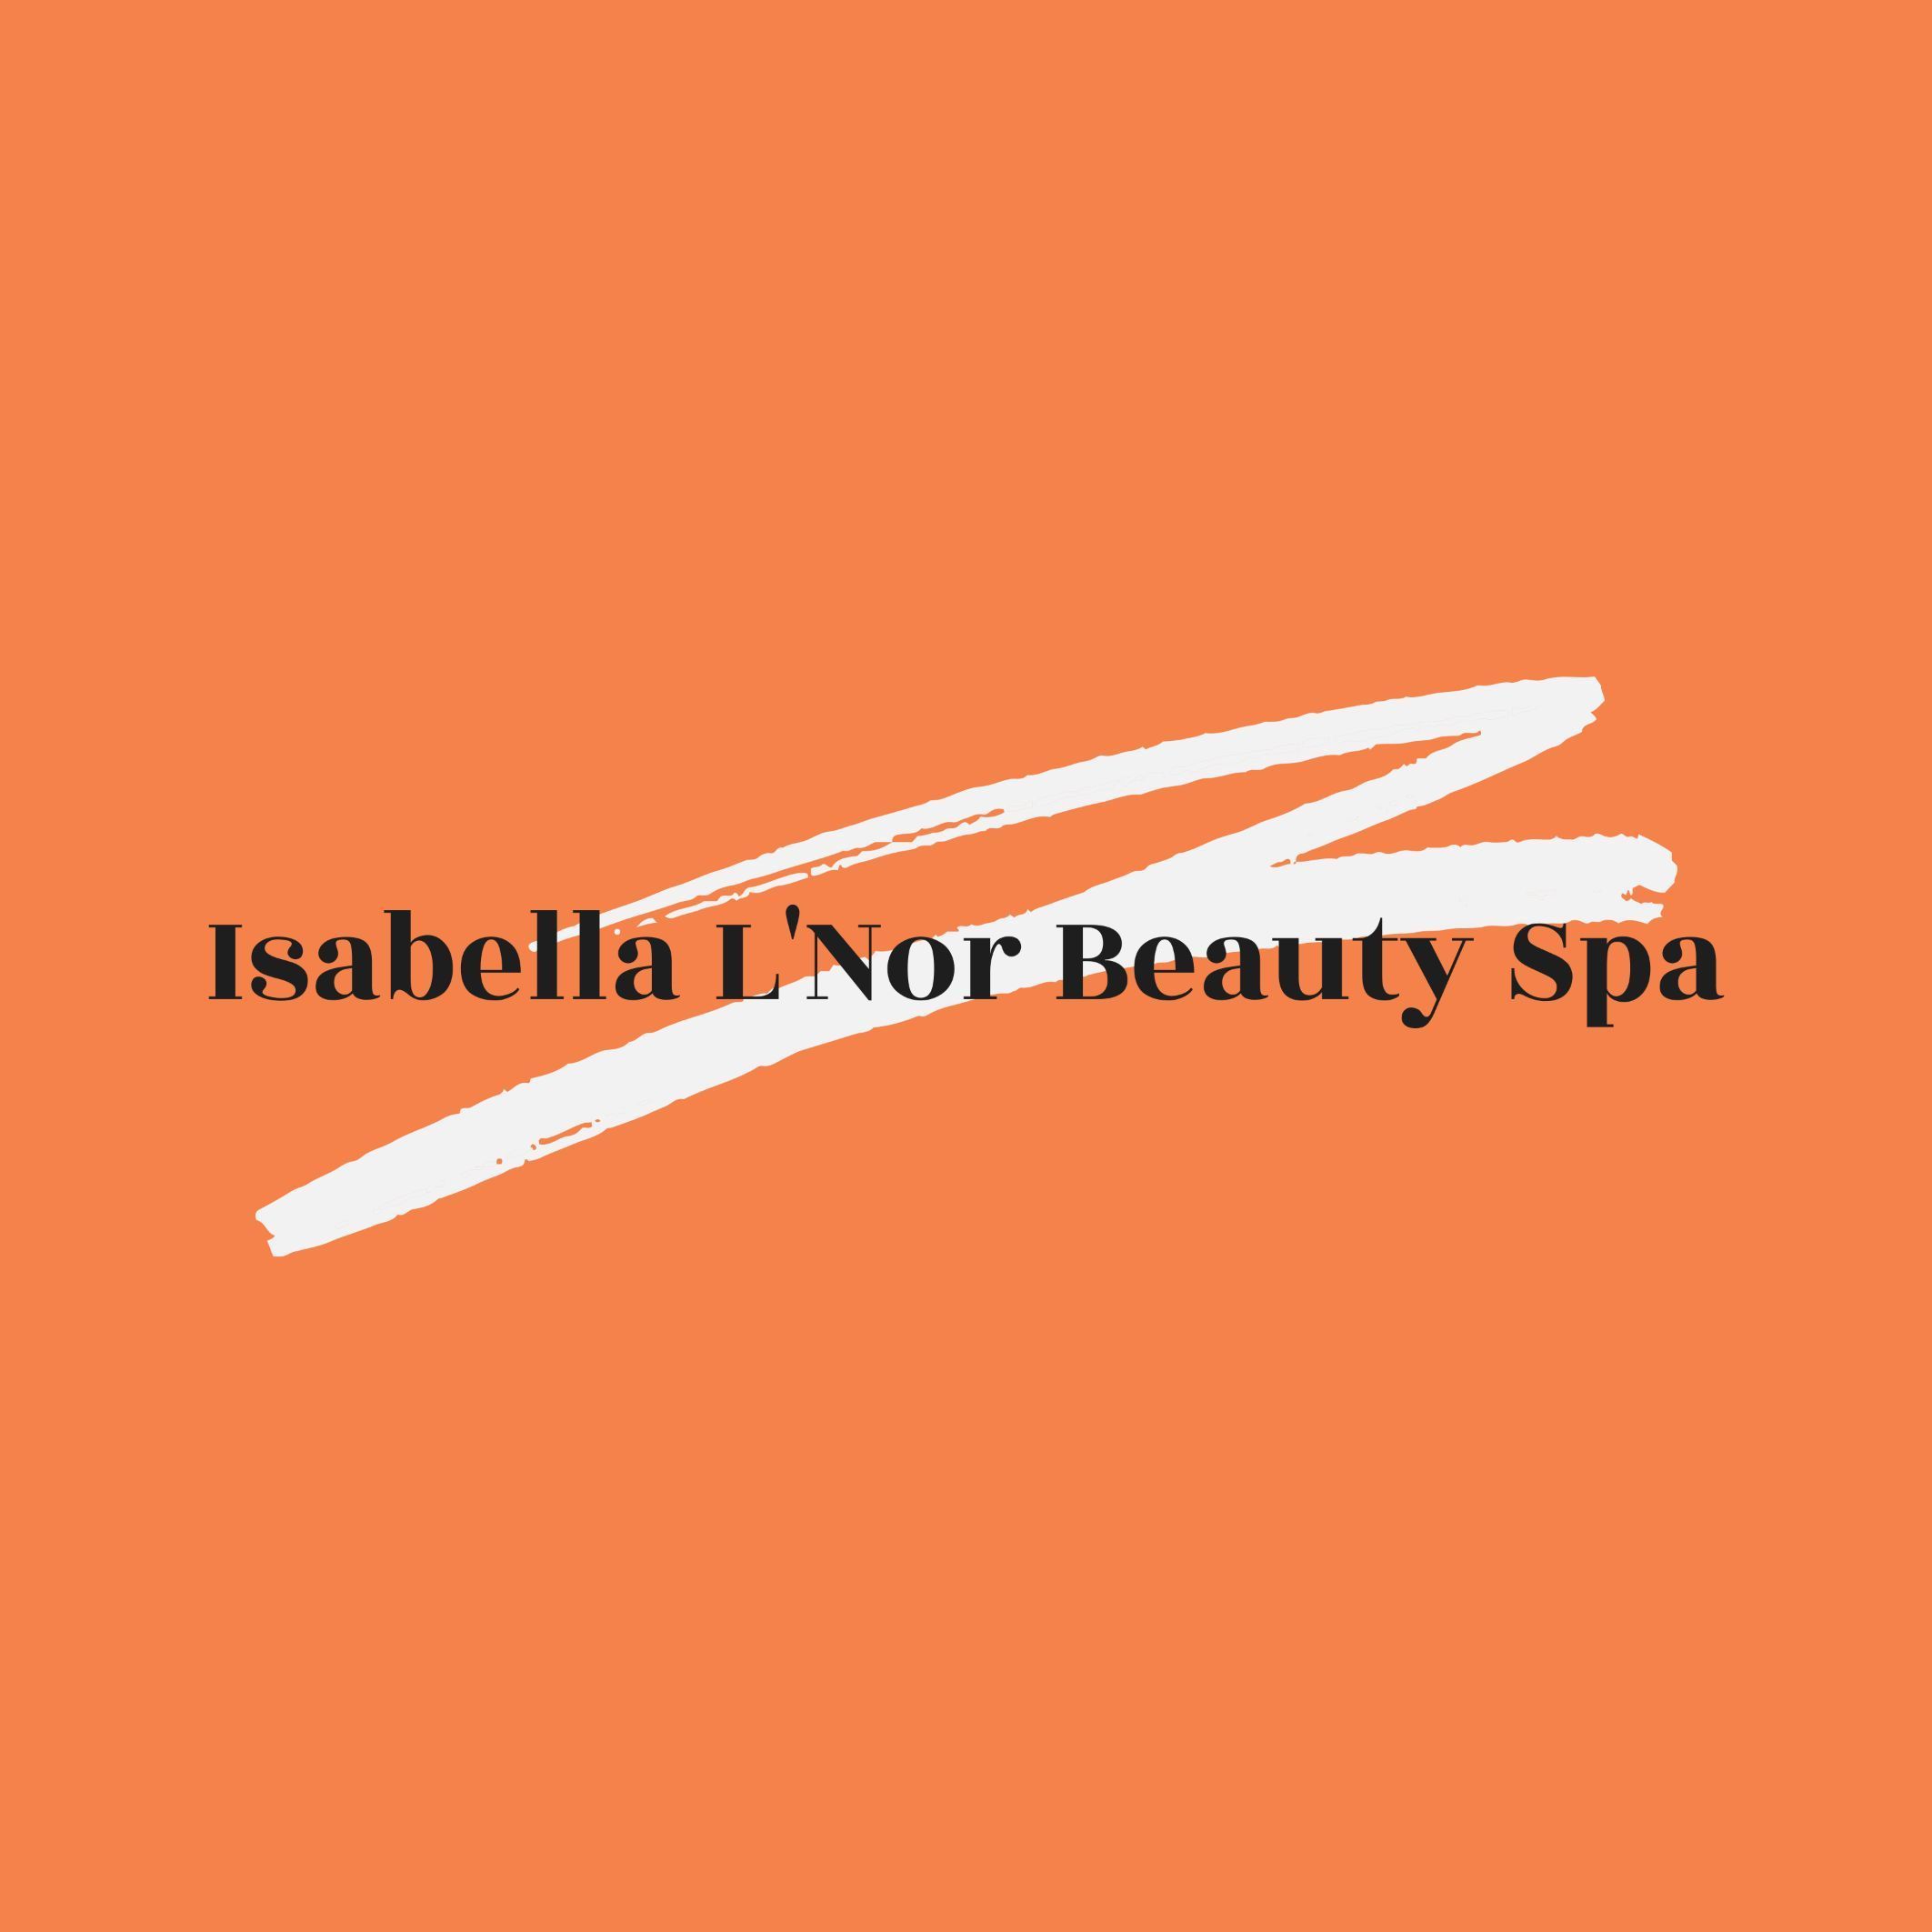 Isabella L'Nor Beauty Spa, 903 Union Station Pkwy, 43001, Lewisville, 75057